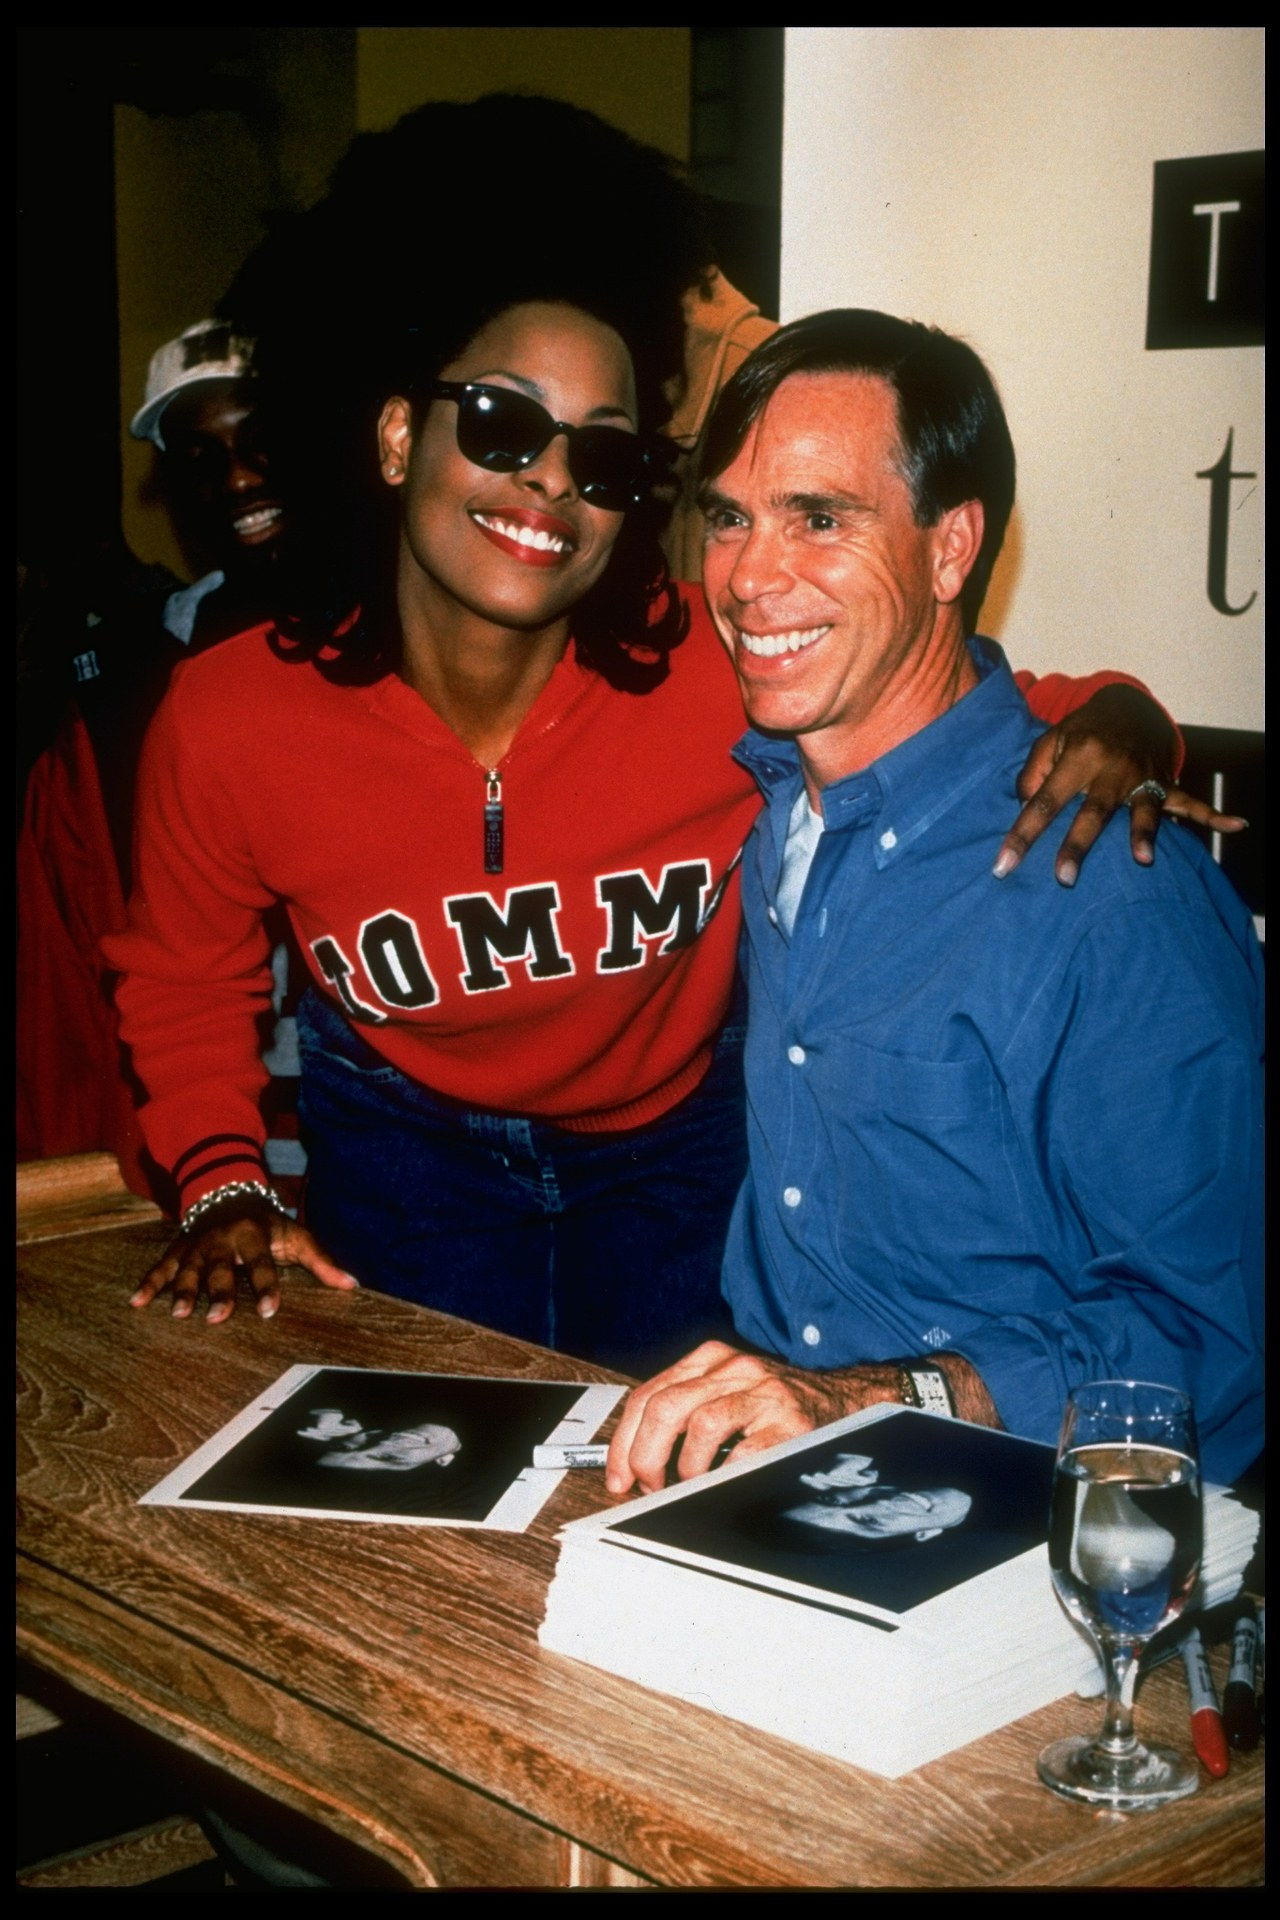 Fashion designer Tommy Hilfiger (R) w. rap singer/model Spinerella w. stack of his publicity portraits at autograph party to launch his new women's clothing line called Tommy Girl, at Bloomingdale's dept. store. (Photo by James Keyser/The LIFE Images Collection/Getty Images)